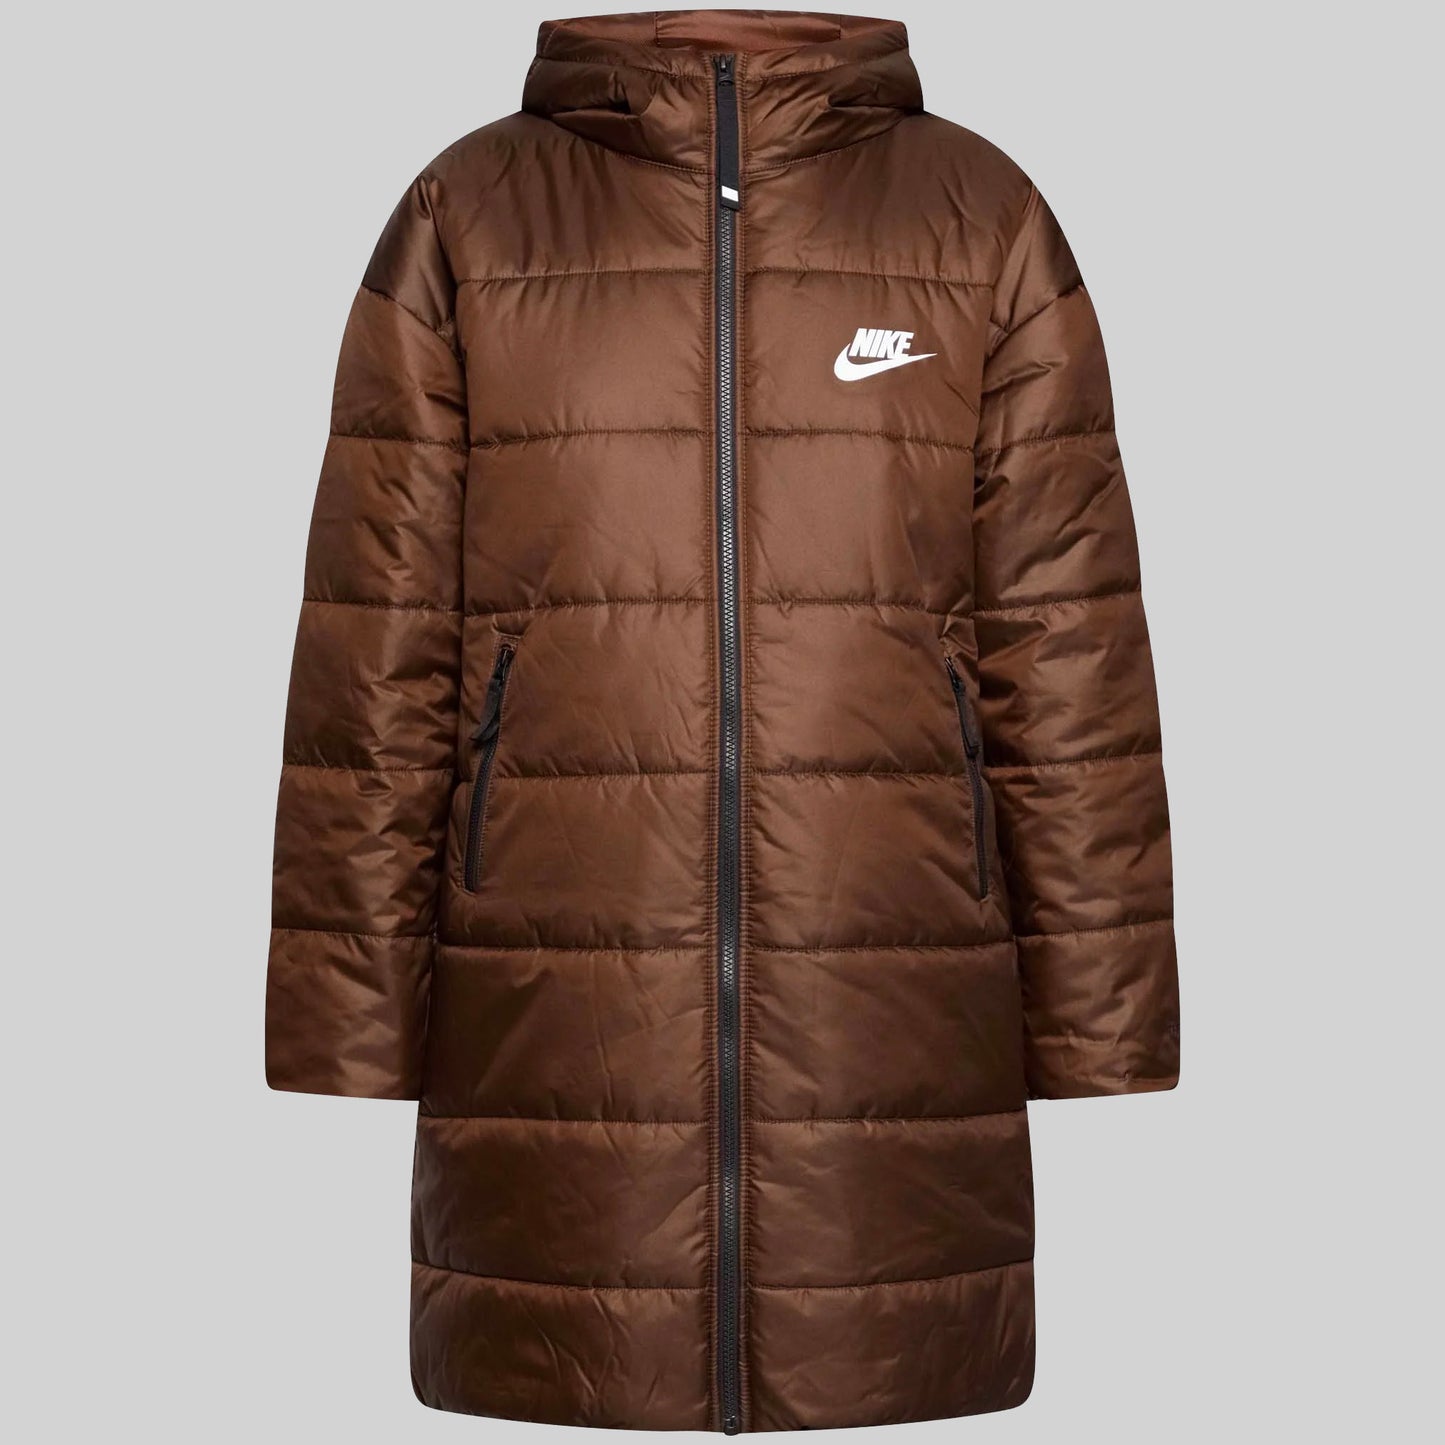 Womens Nike Therma-Fit Hooded Jacket